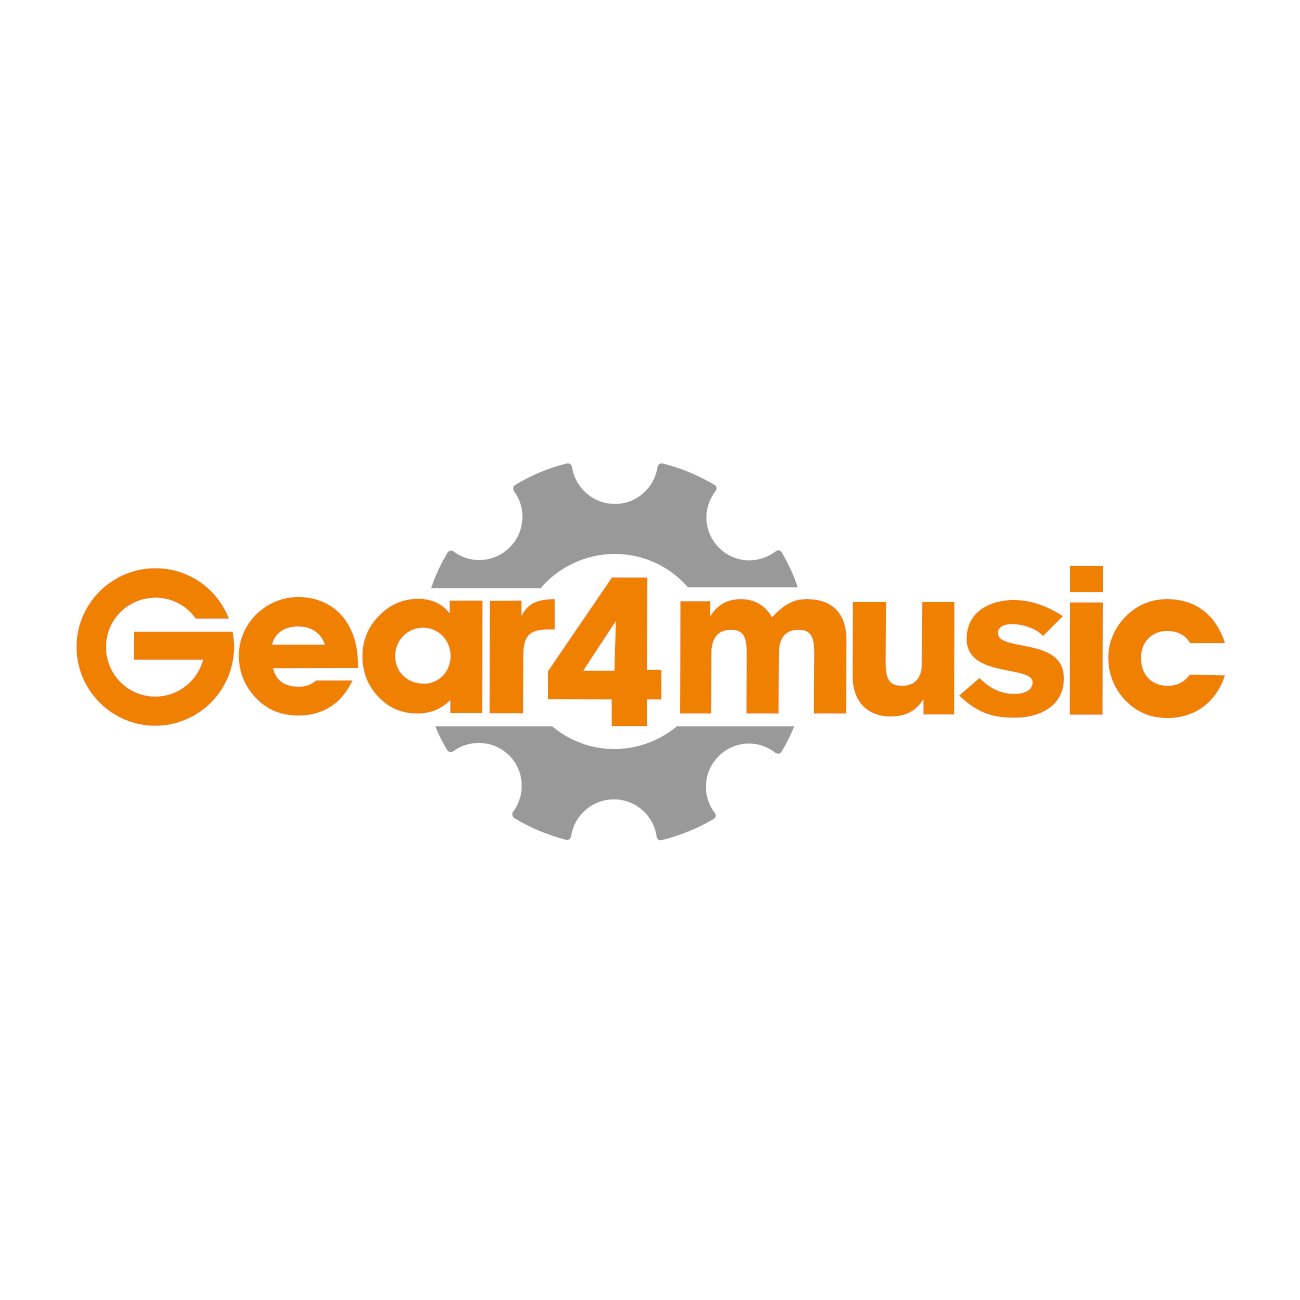 We're the software team at https://t.co/tTxIoytjG7. Talk tech with us!

This account isn't monitored by customer services - for support, please contact @Gear4music.